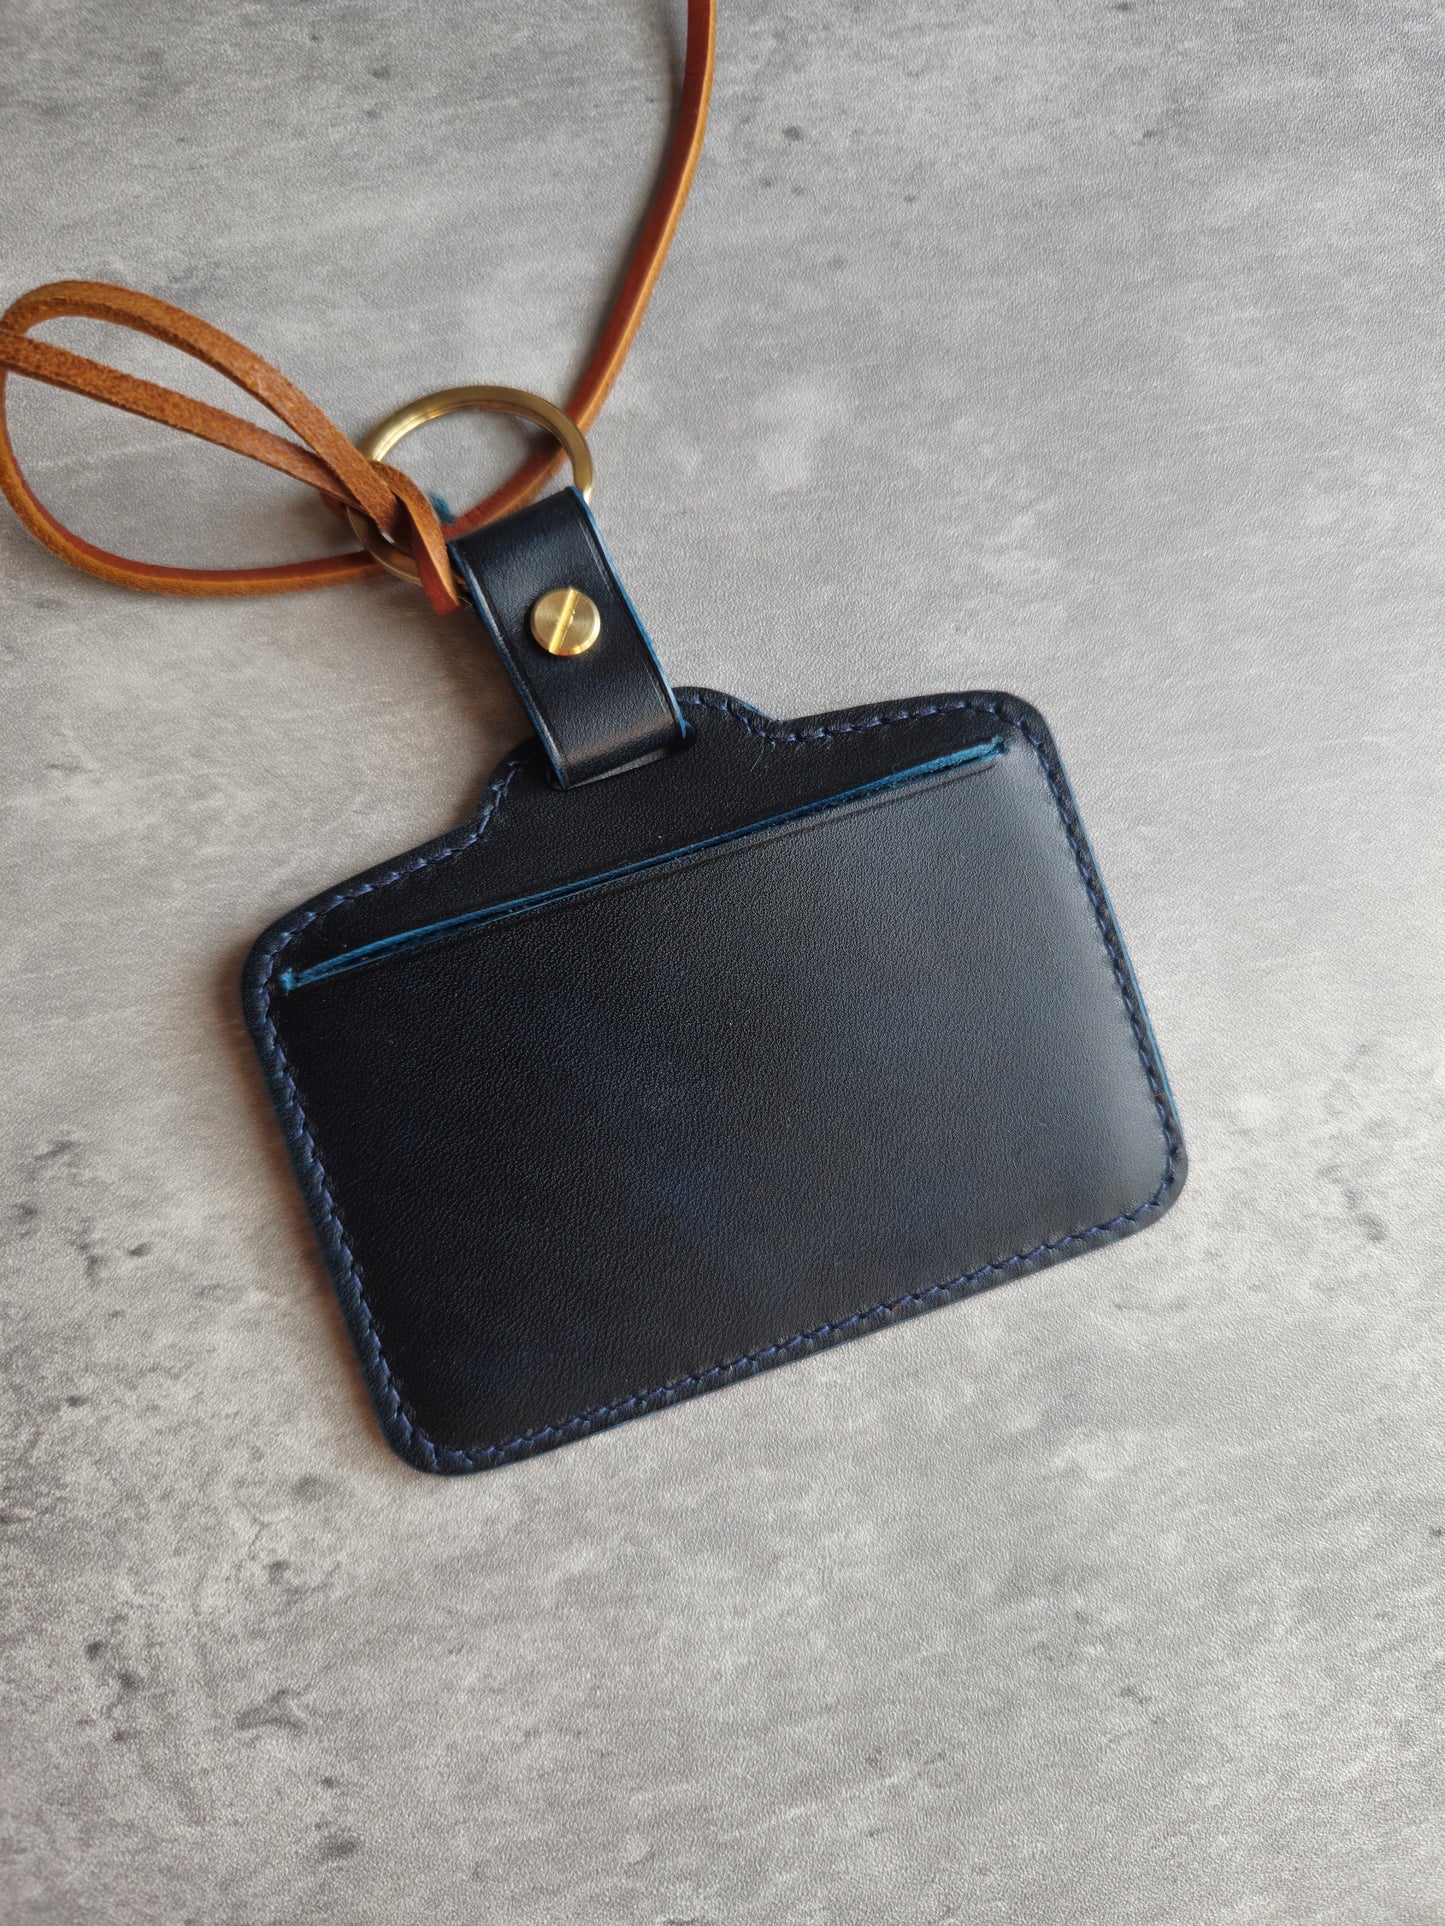 I.D Tag | Leather craft Template - DIY - PDF pattern